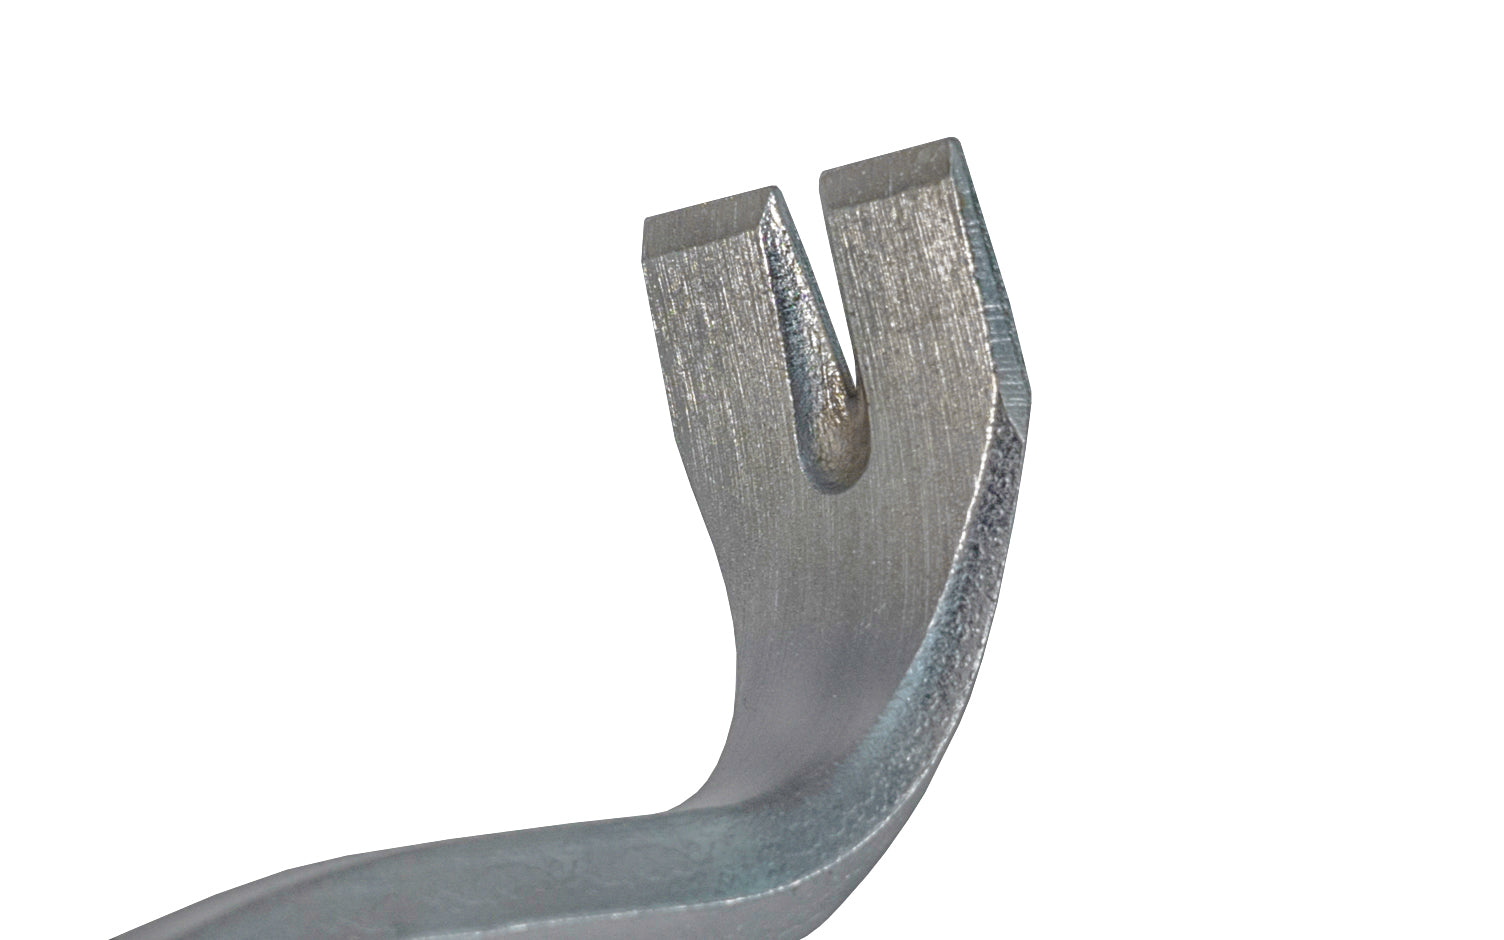 Vaughan 10" Moulding Lifter Bar ~ No. MLB - Forged steel, tempered & hardened for strength ~ Great for baseboard & moulding